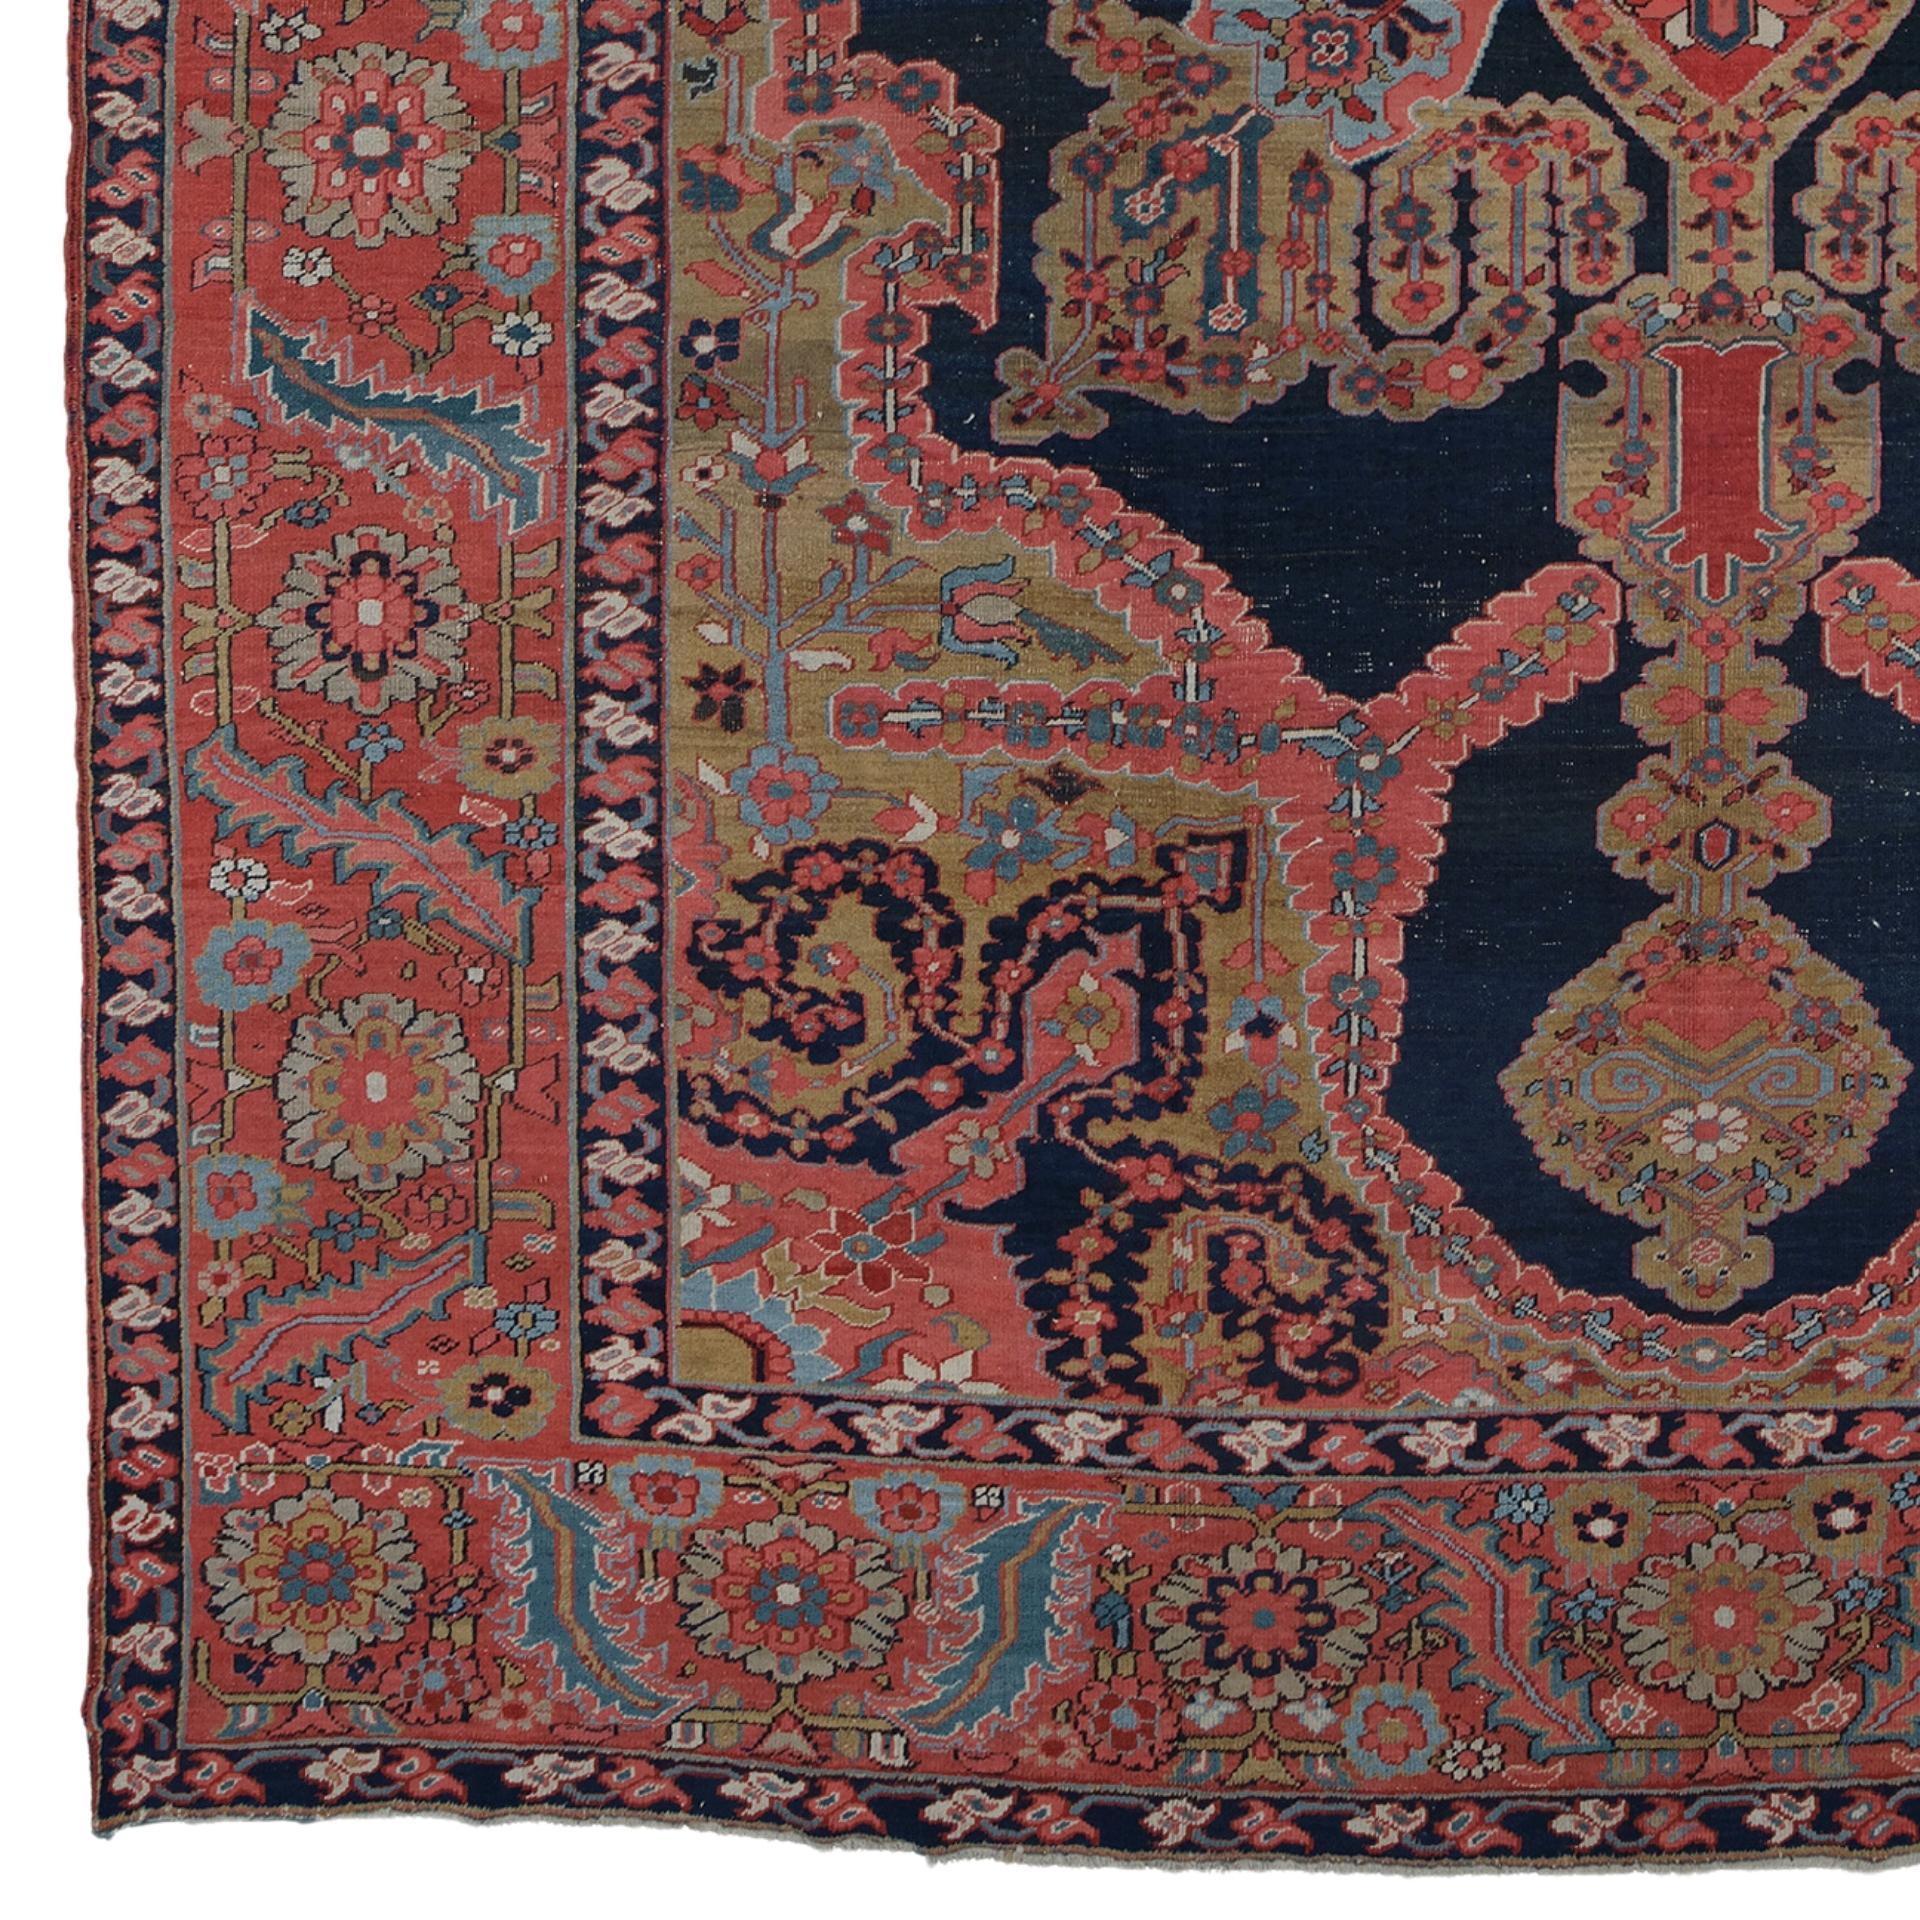 This antique serapi carpet is a magnificent work that will allow you to establish a connection between art and history. This 19th-century rug is hand-woven with precision and care, with each thread telling the story of an era. Rich colors in deep